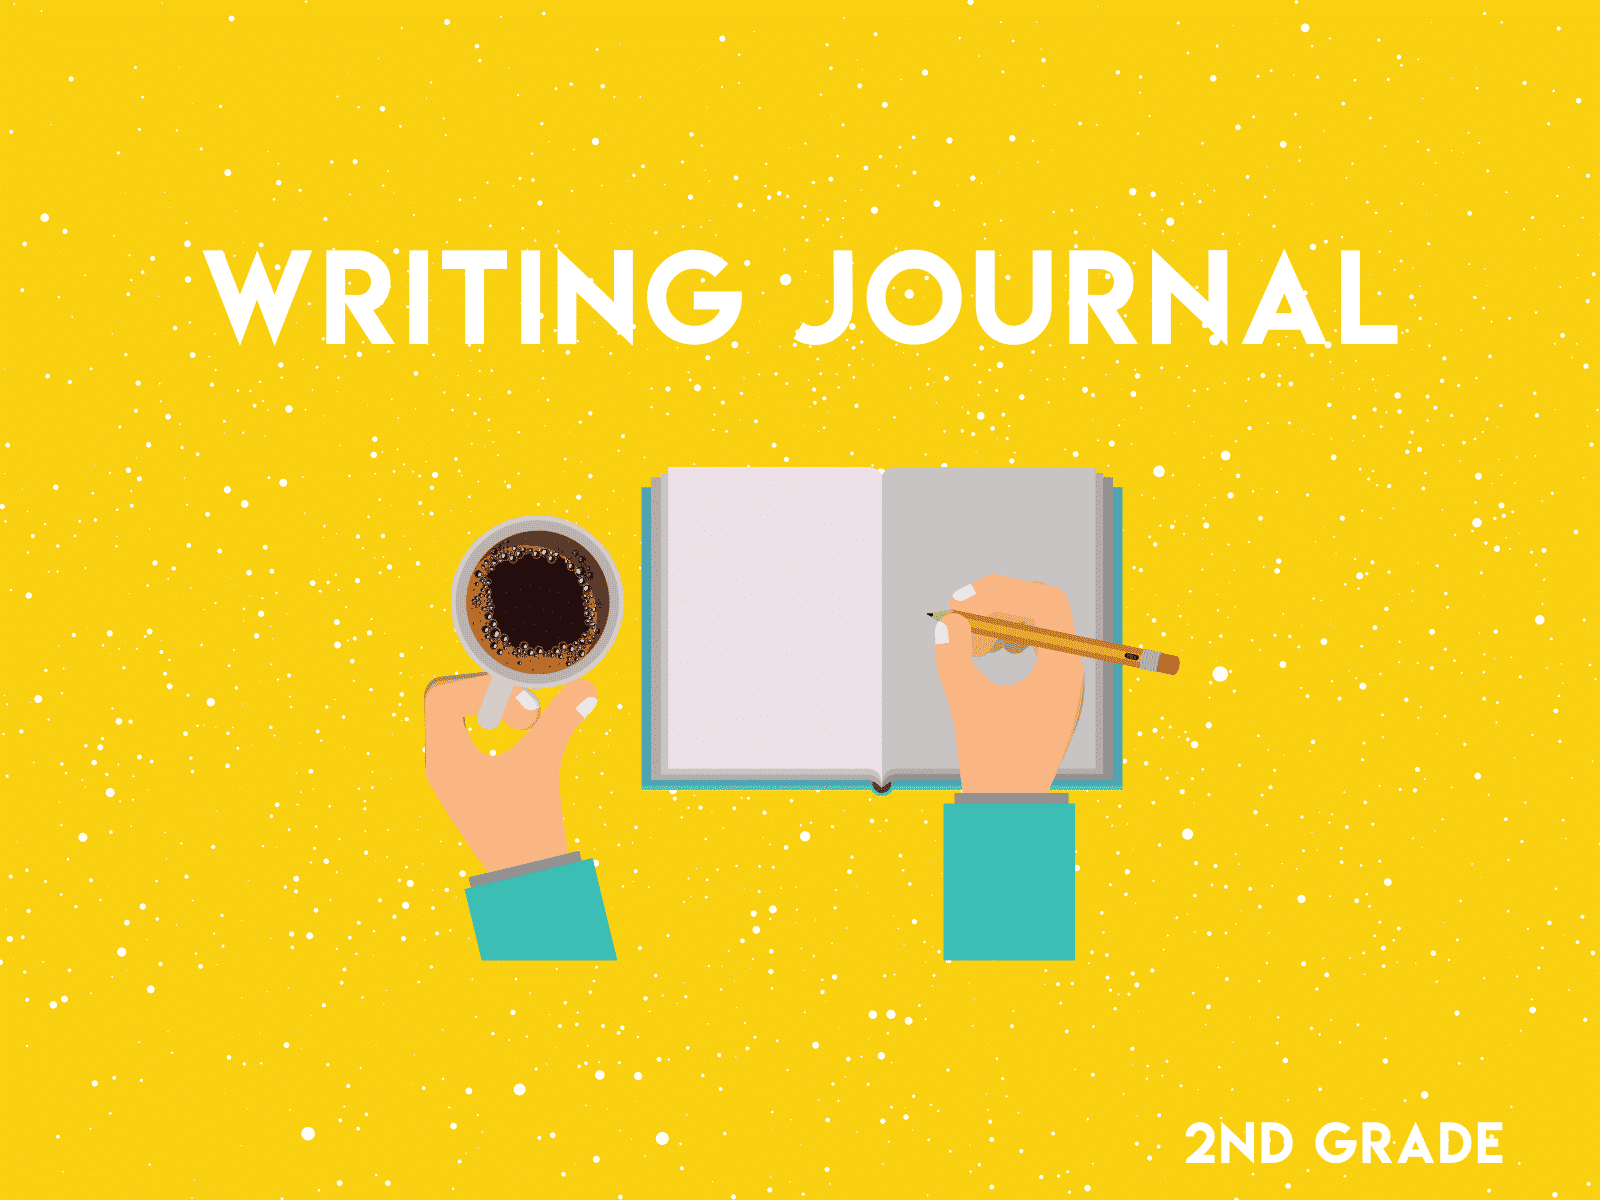 Writing journal for second grade writing students to practice narrative, opinion, informative, descriptive, and how-to writing.